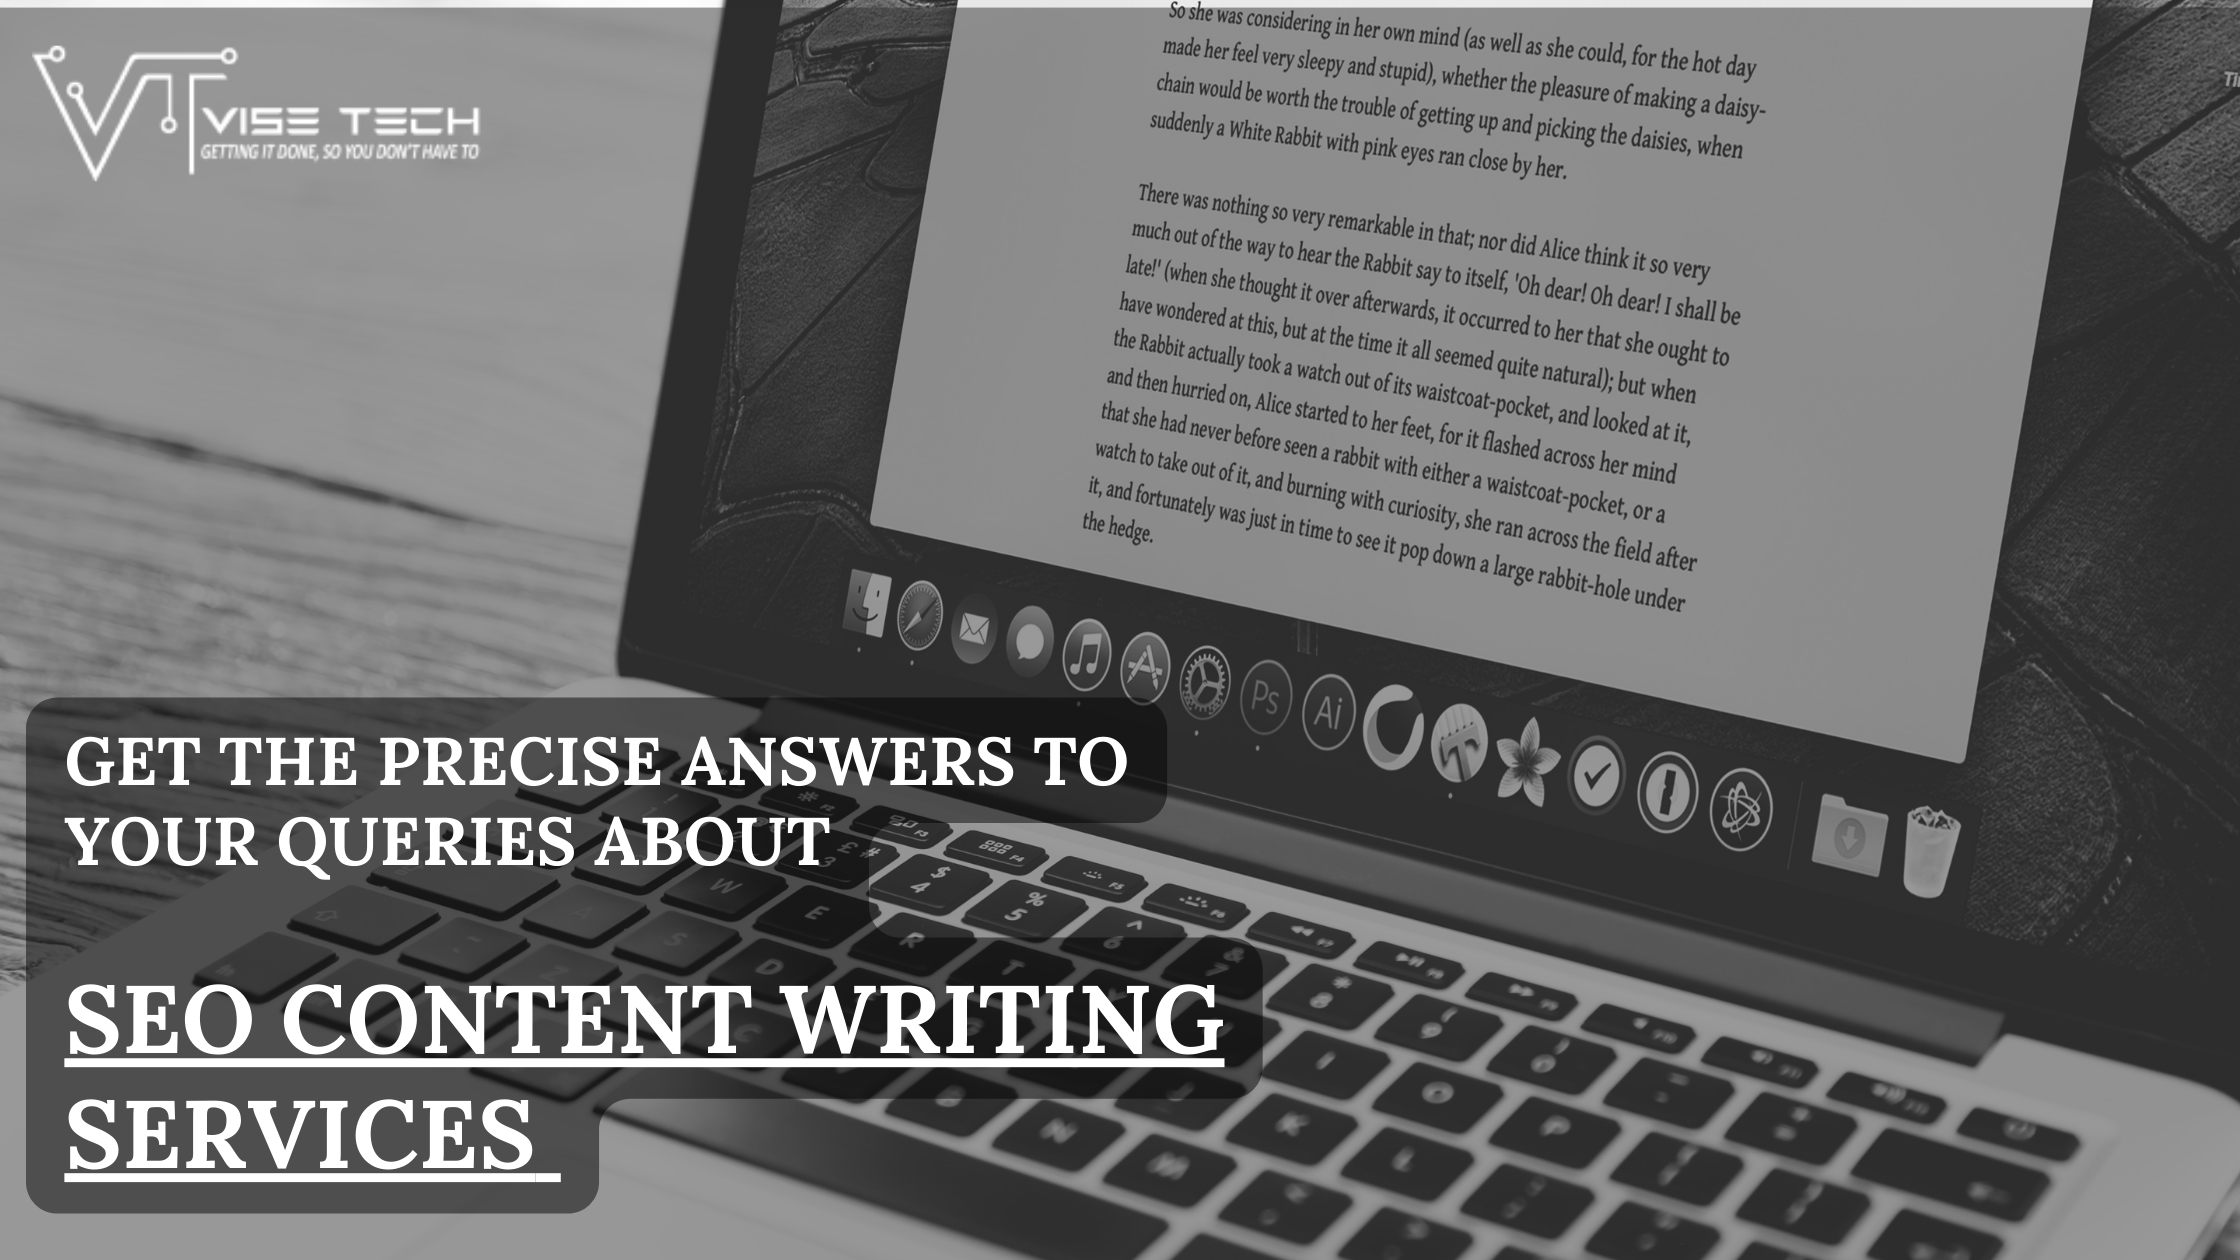 SEO CONTENT WRITING SERVICES